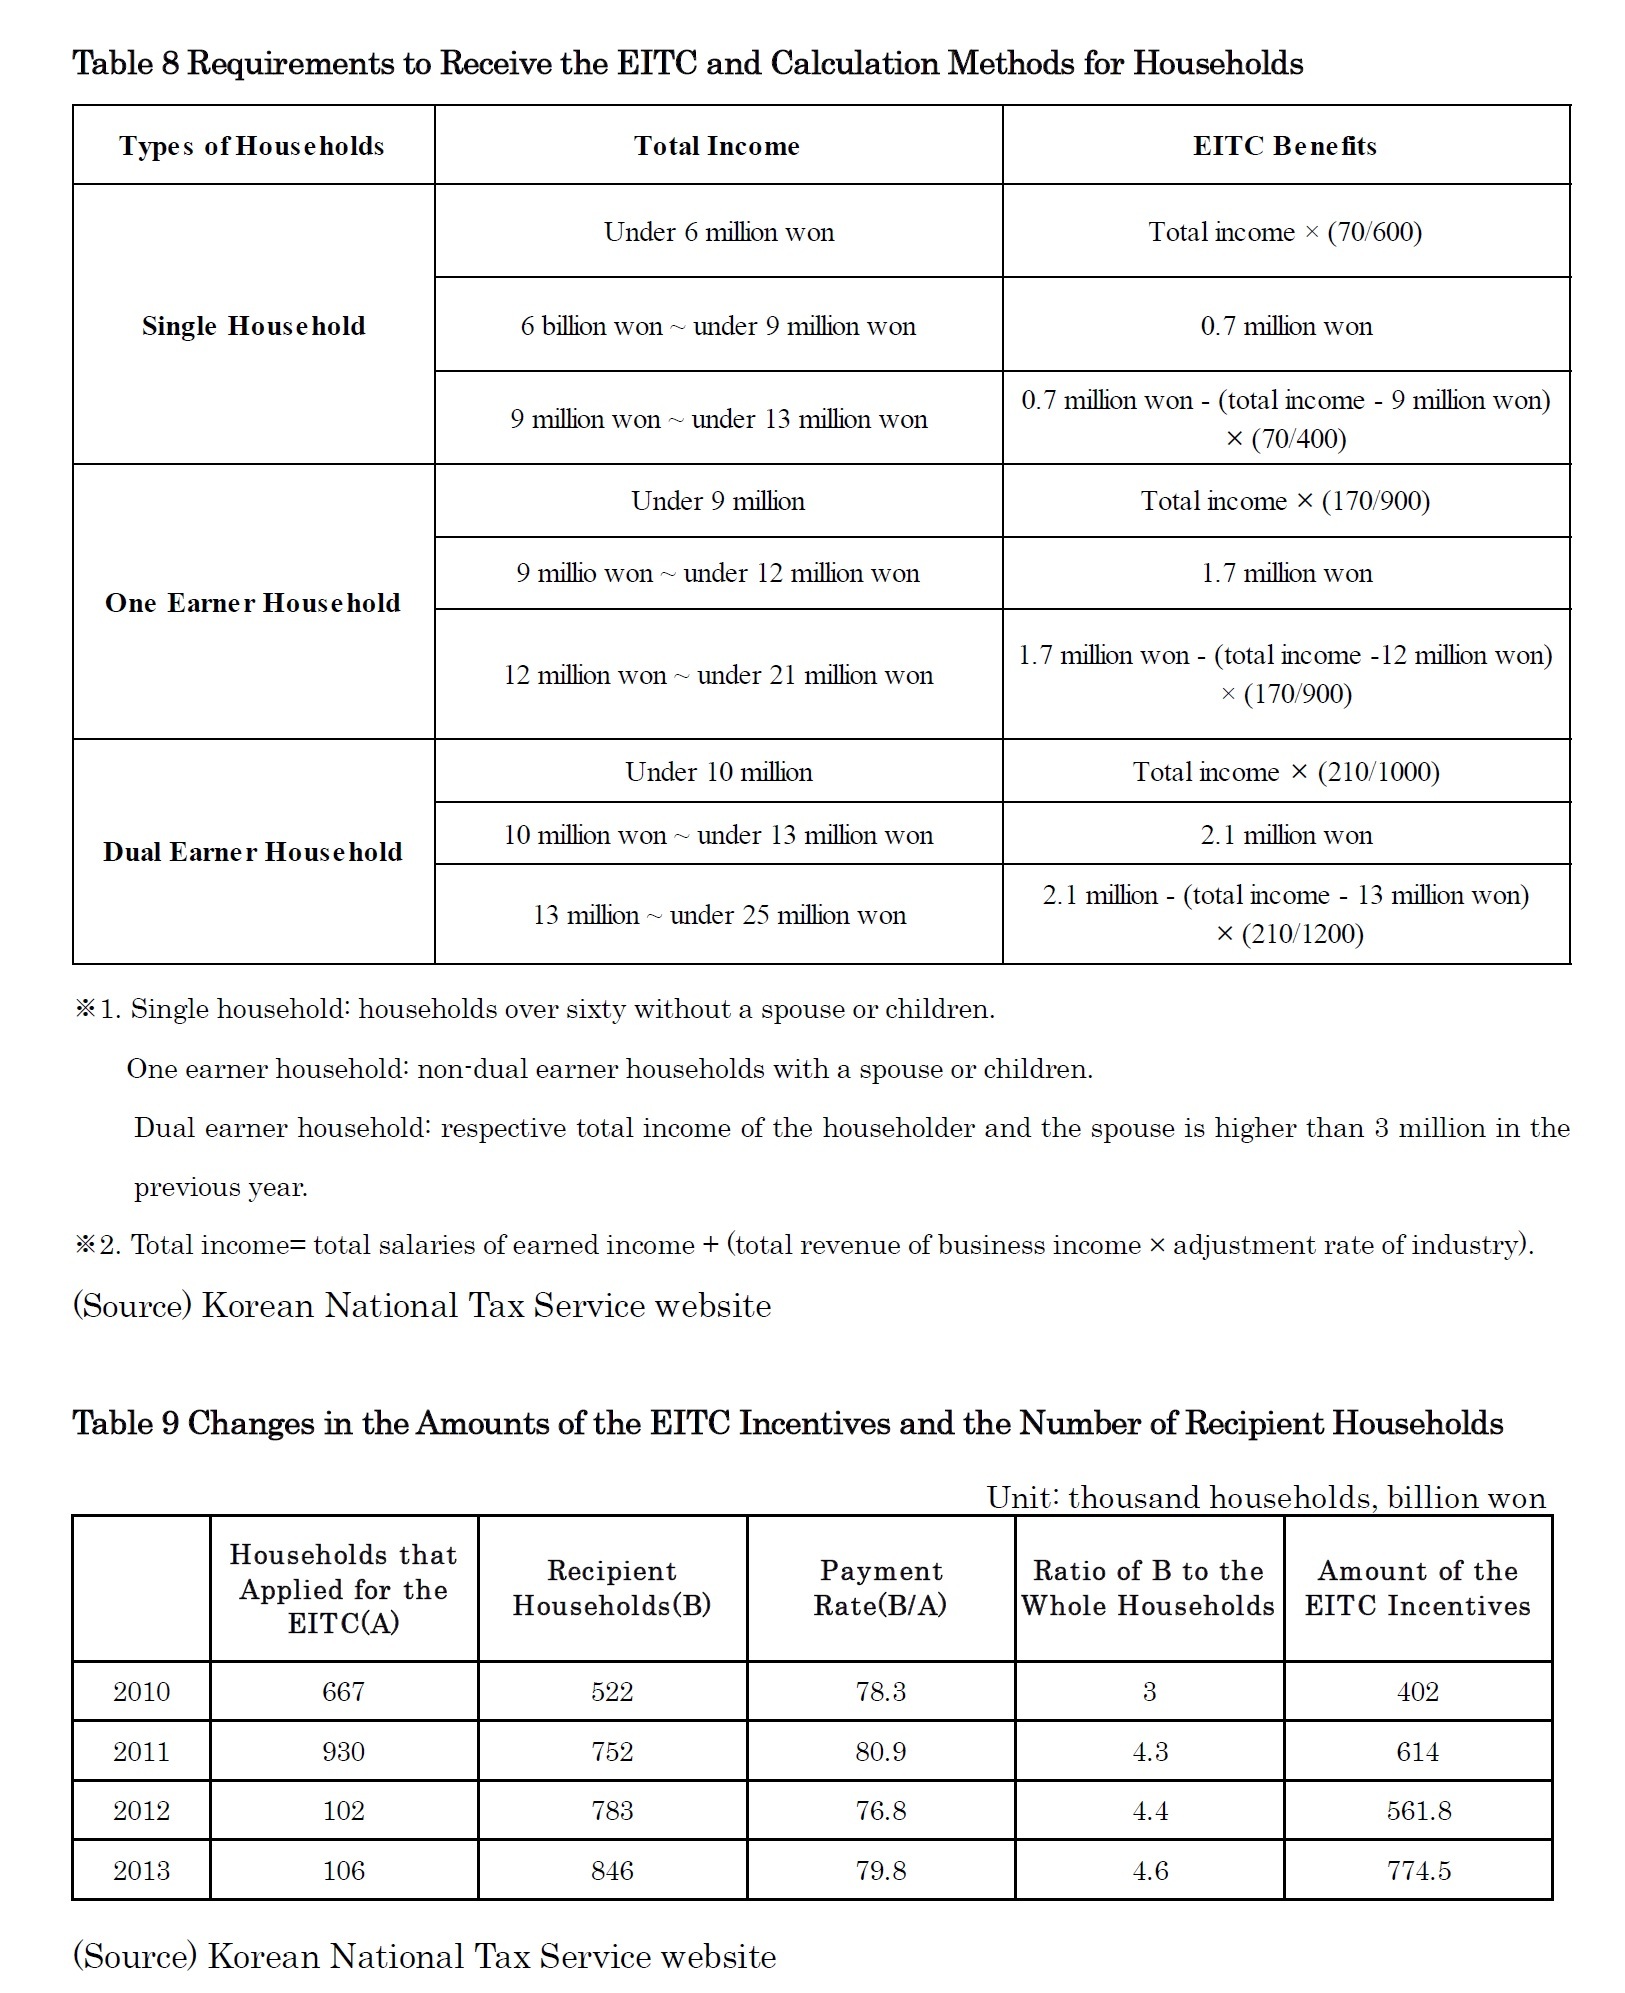 Table 8 Requirements to Receive the EITC and Calculation Methods for Households /Table 9 Changes in the Amounts of the EITC Incentives and the Number of Recipient Households